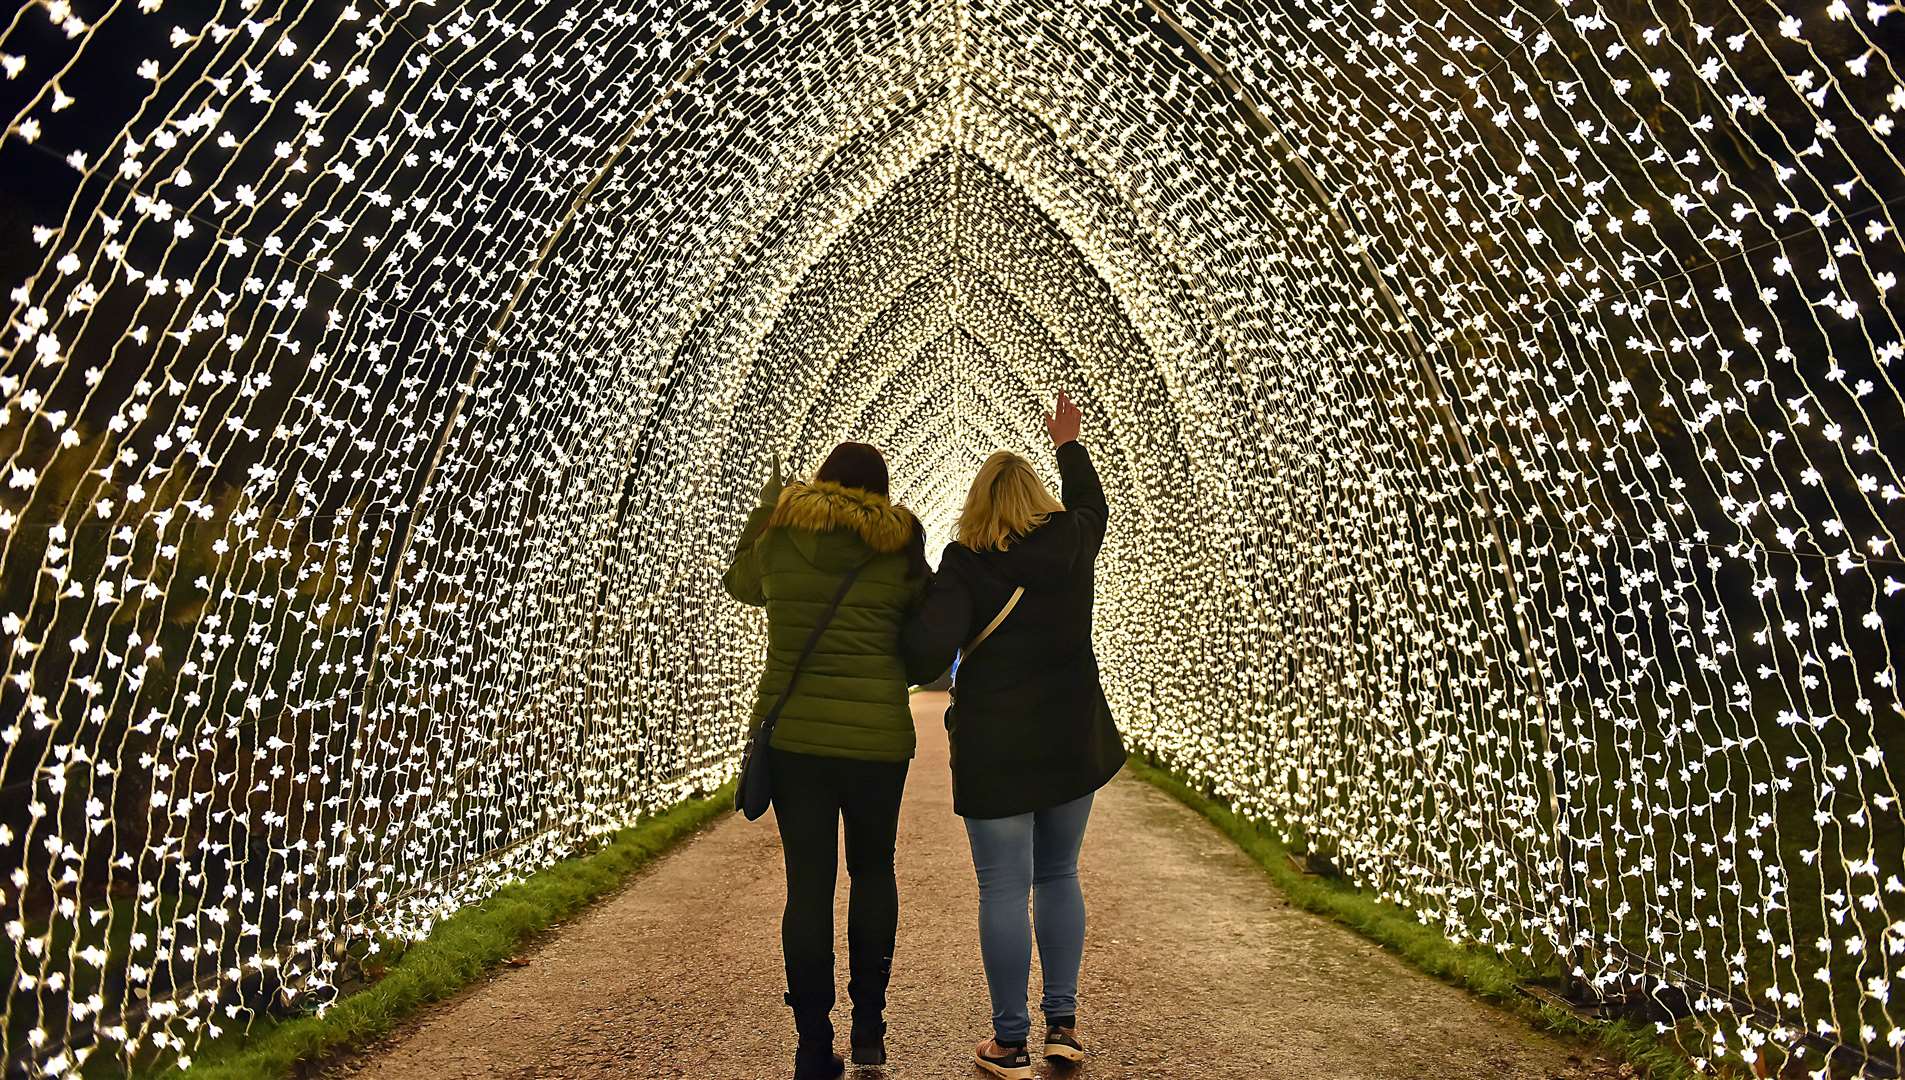 There will be new installations as well as returning favourites such as the glimmering light tunnel